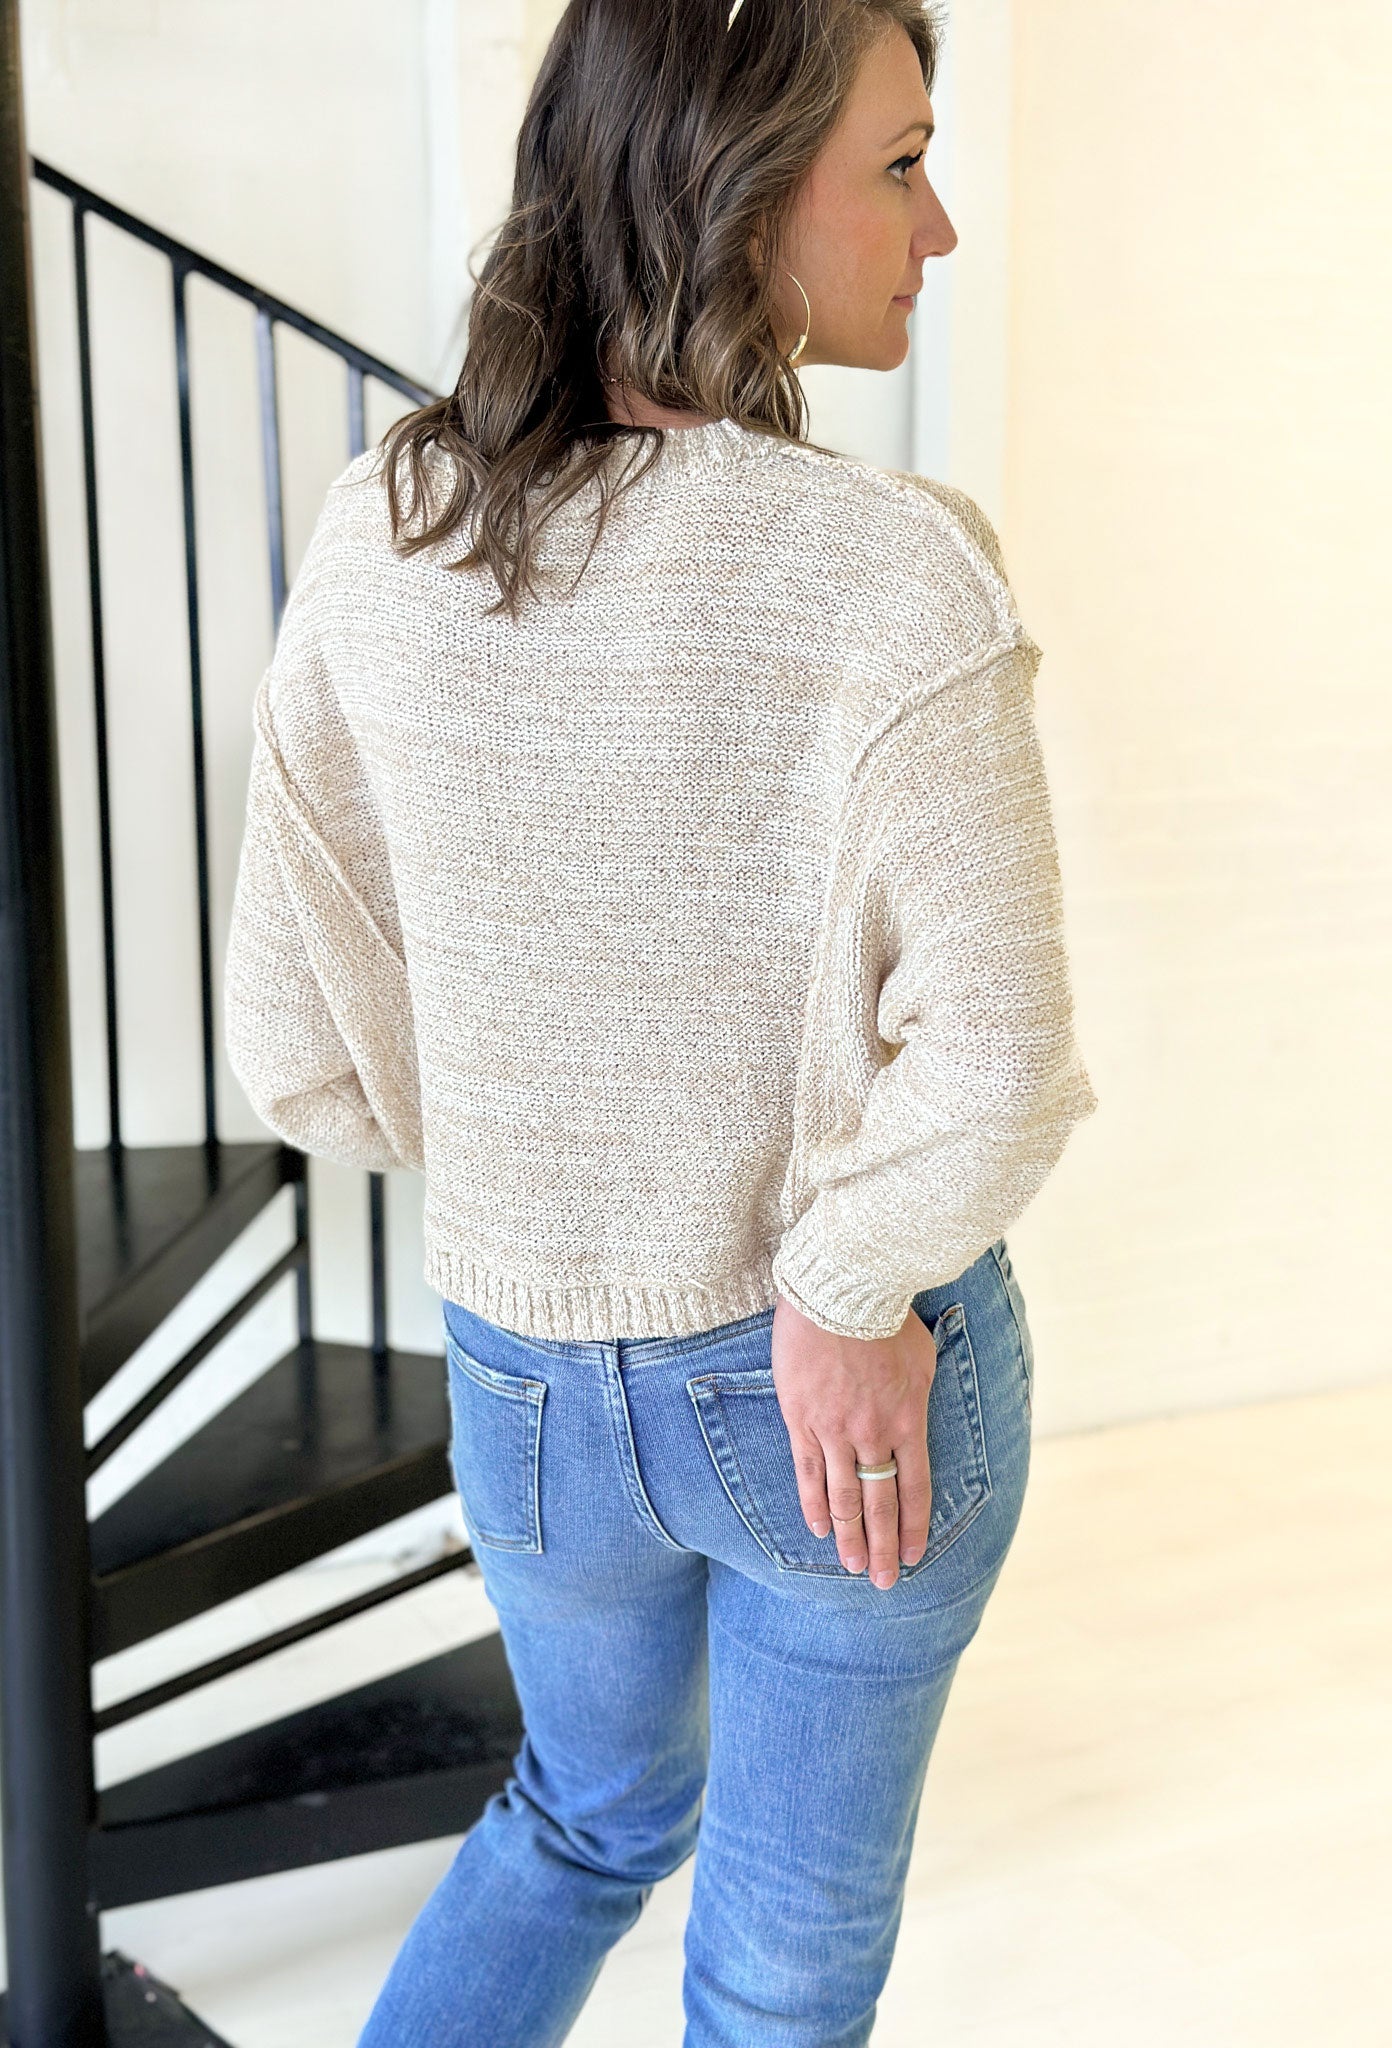 Never Say Never Sweater, warm cream/ oatmeal colored knit sweater with lining on the shoulder and sides